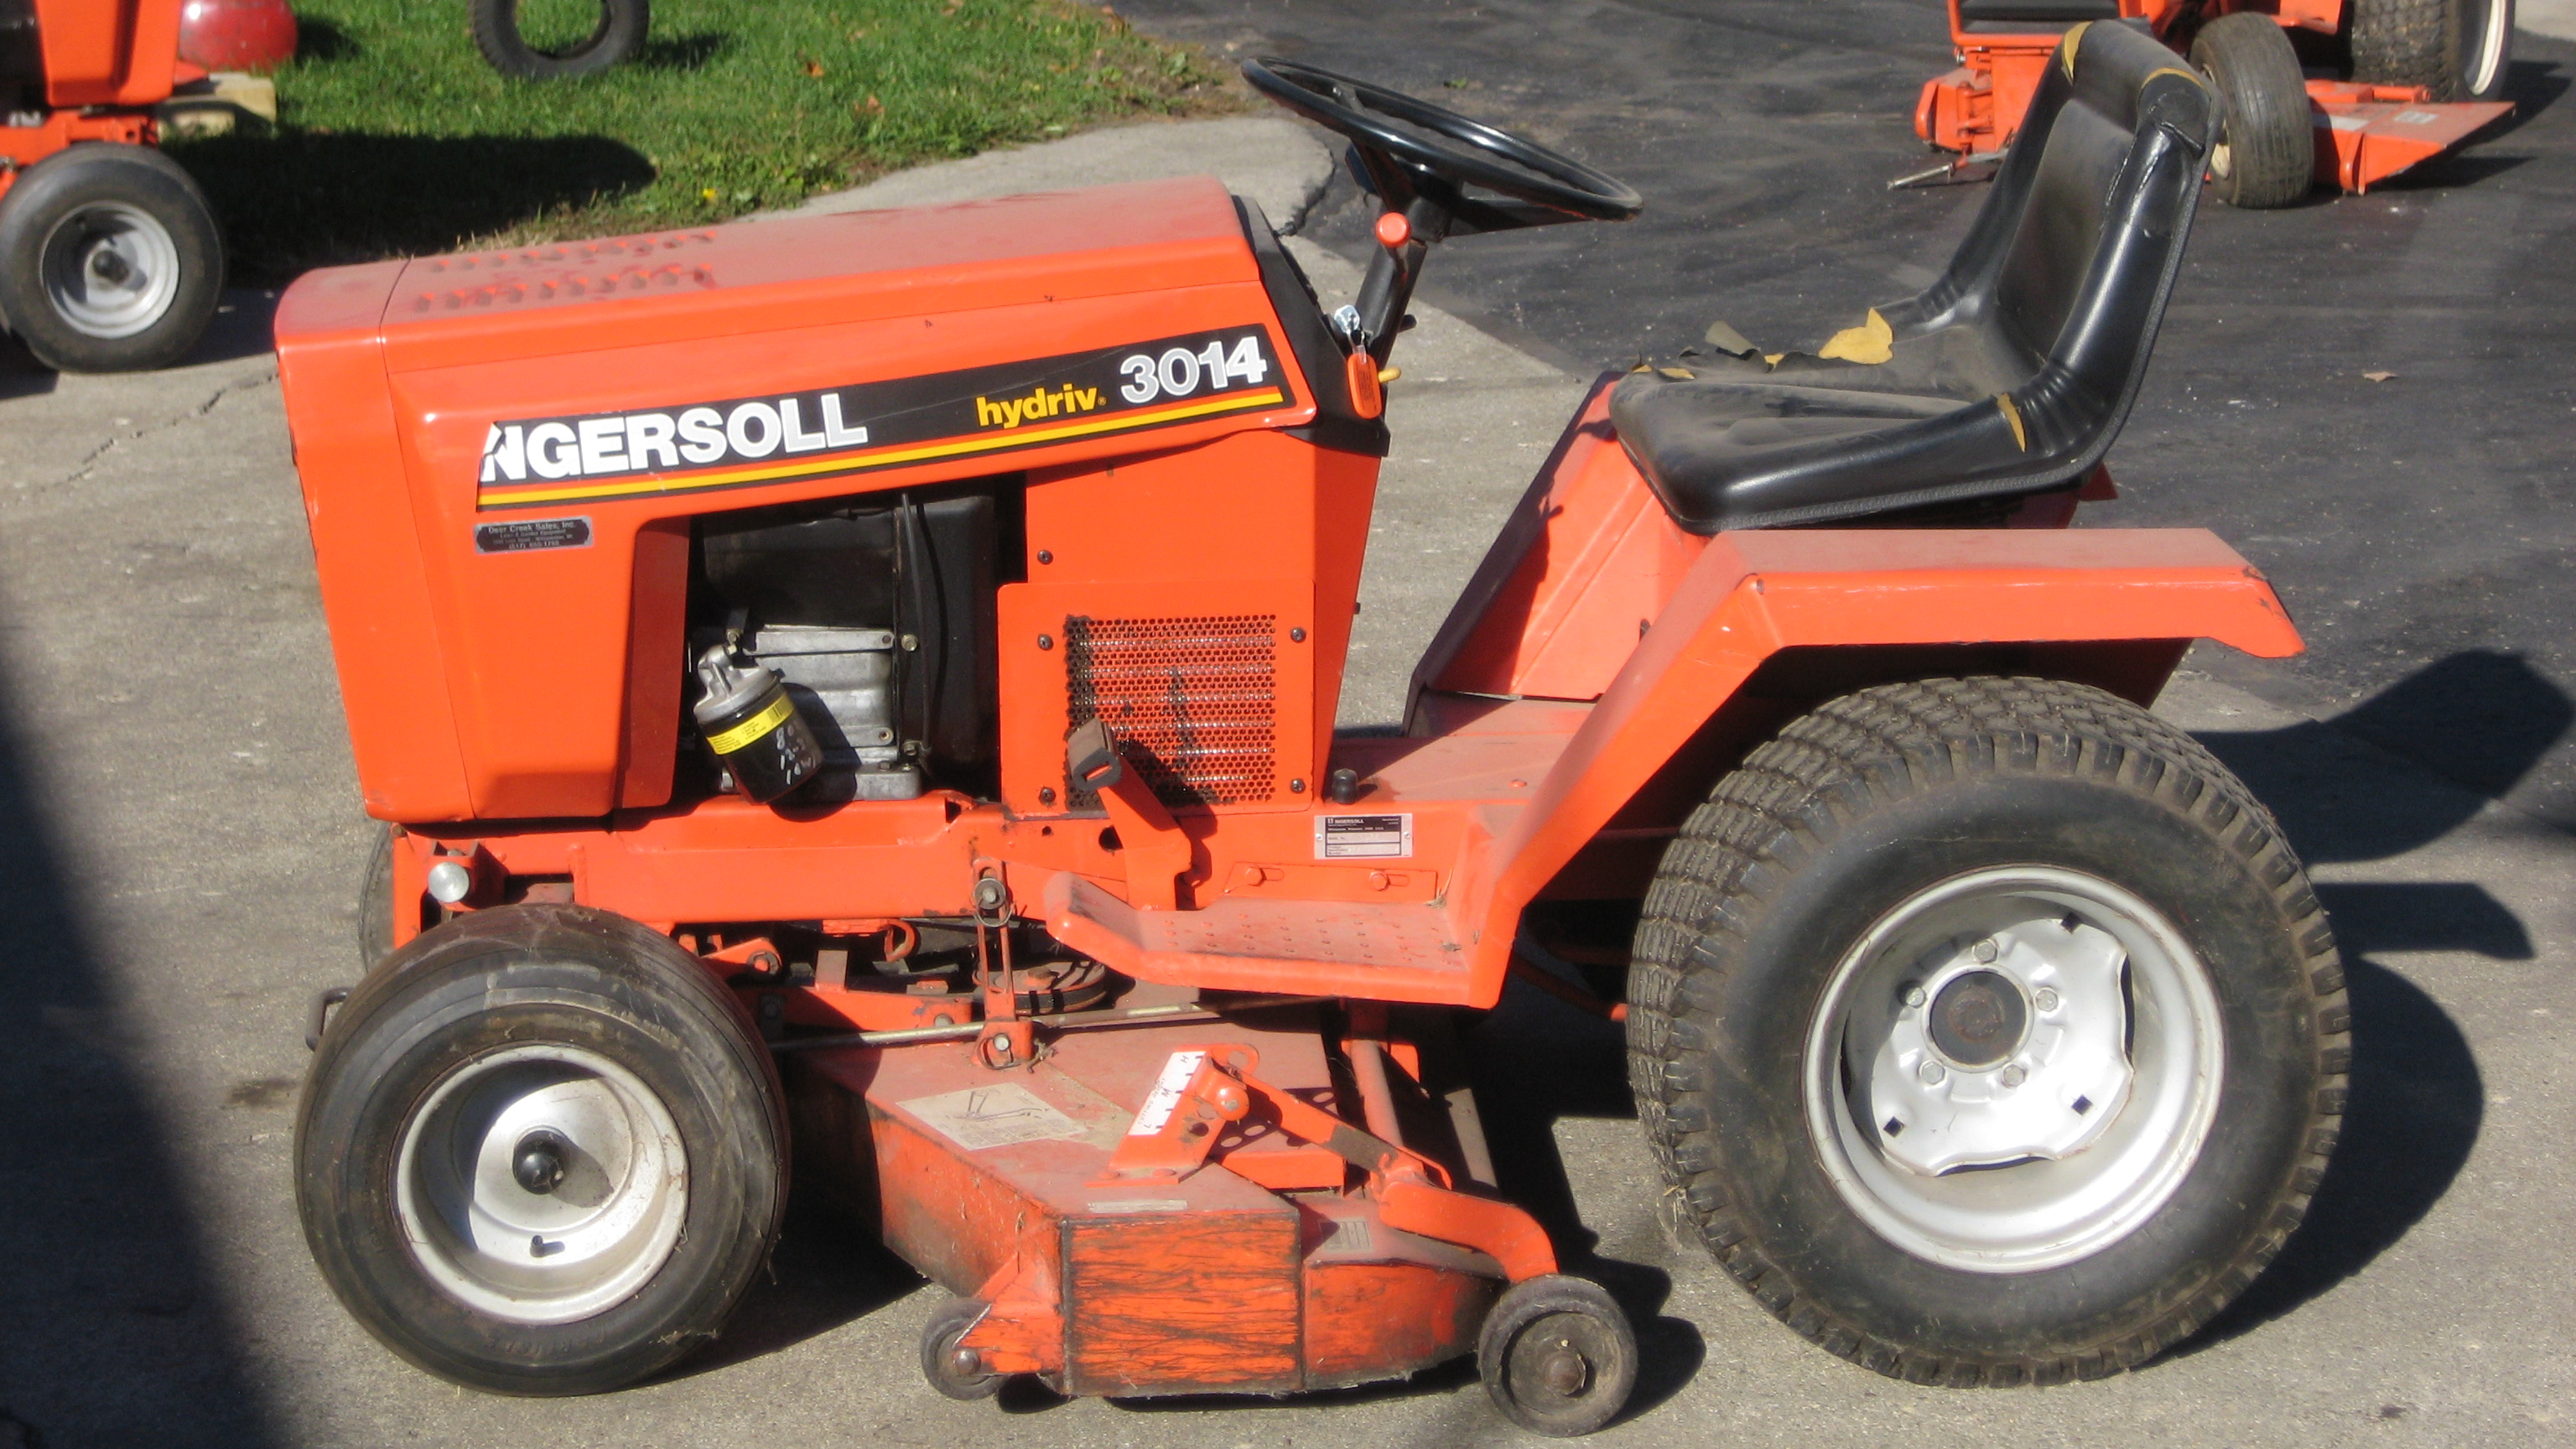 Ingersoll 3014 with 44